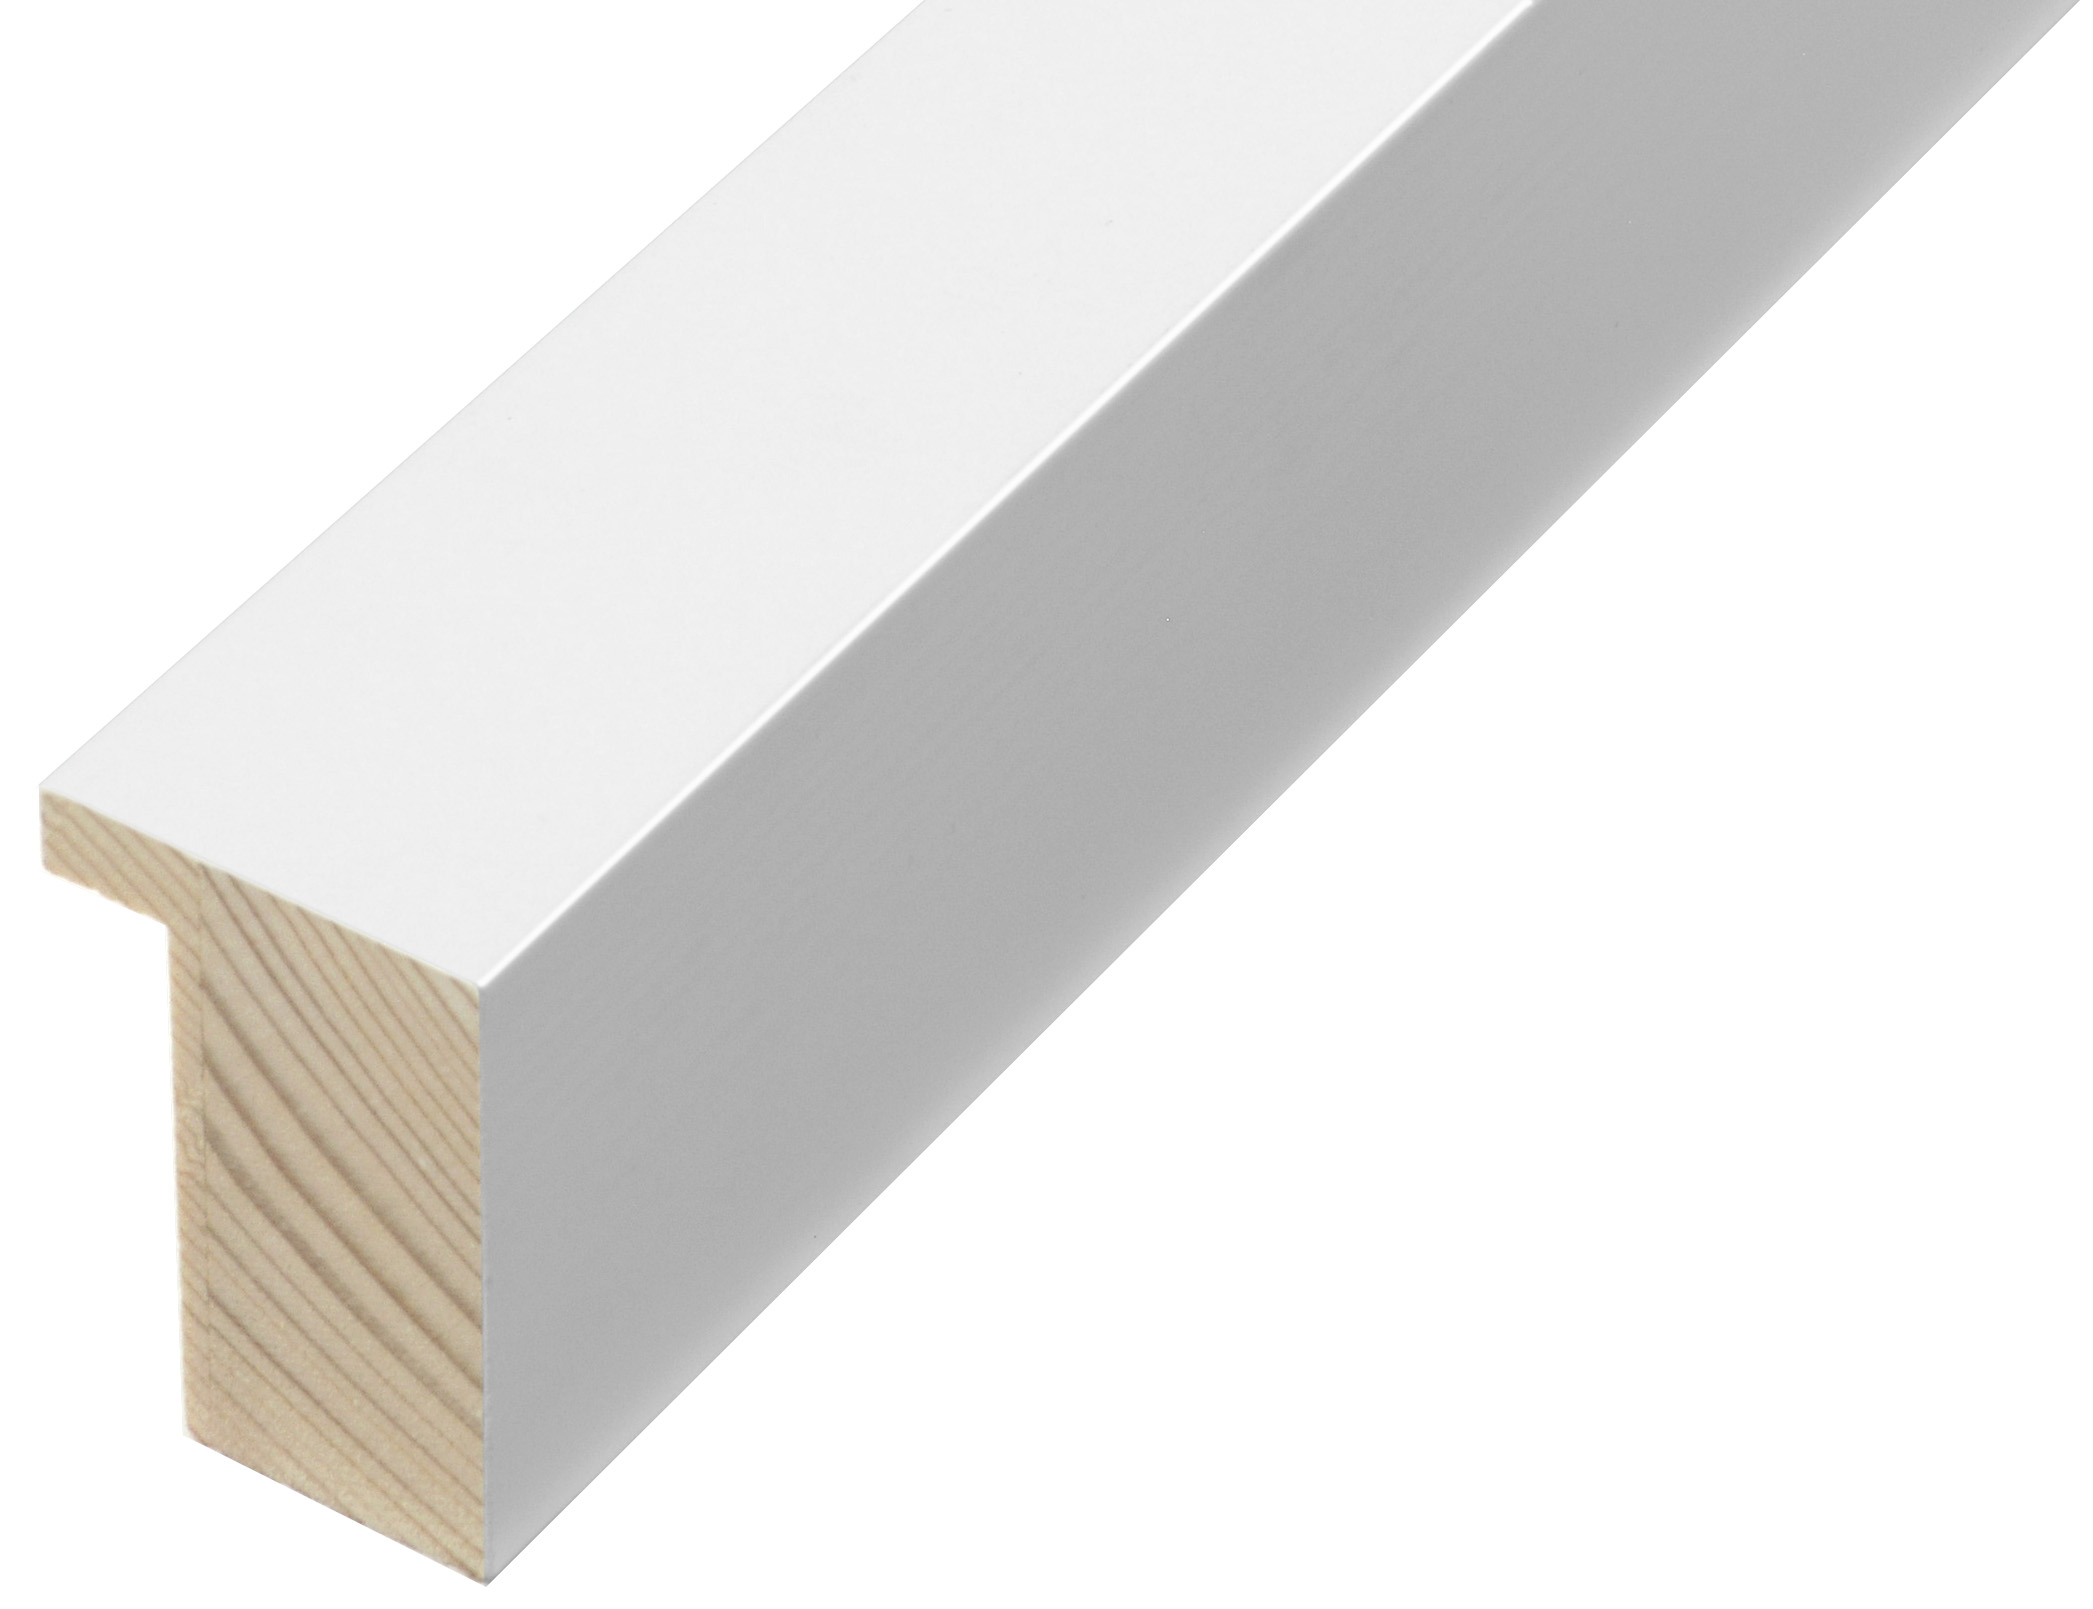 Moulding pine width 33mm height 50 - white - 827BIANCO